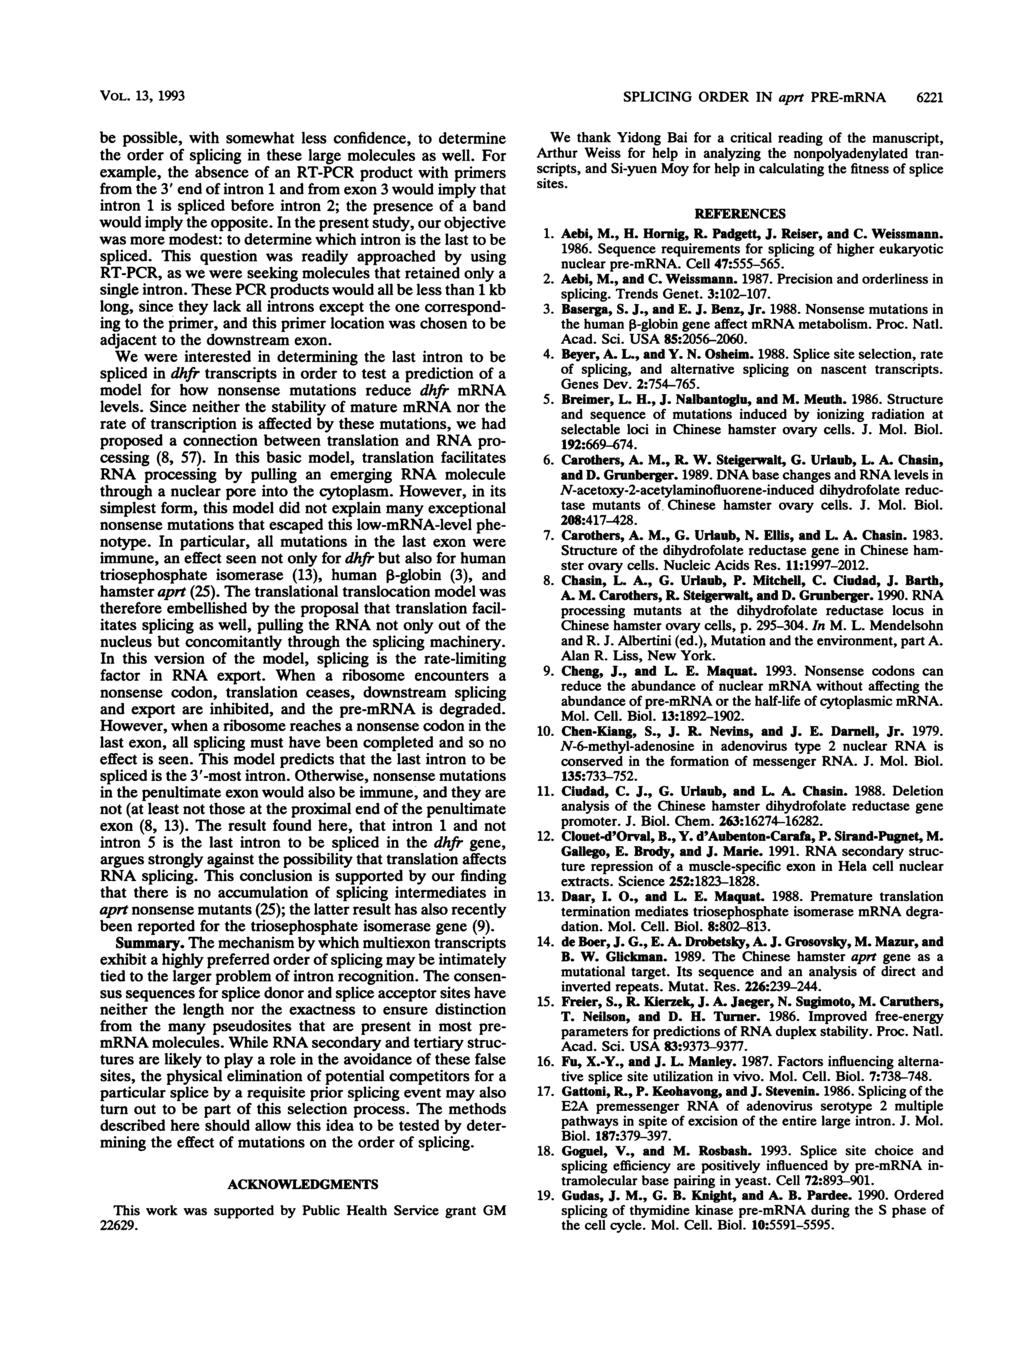 VOL. 13, 1993 be possible, with somewhat less confidence, to determine the order of splicing in these large molecules as well.